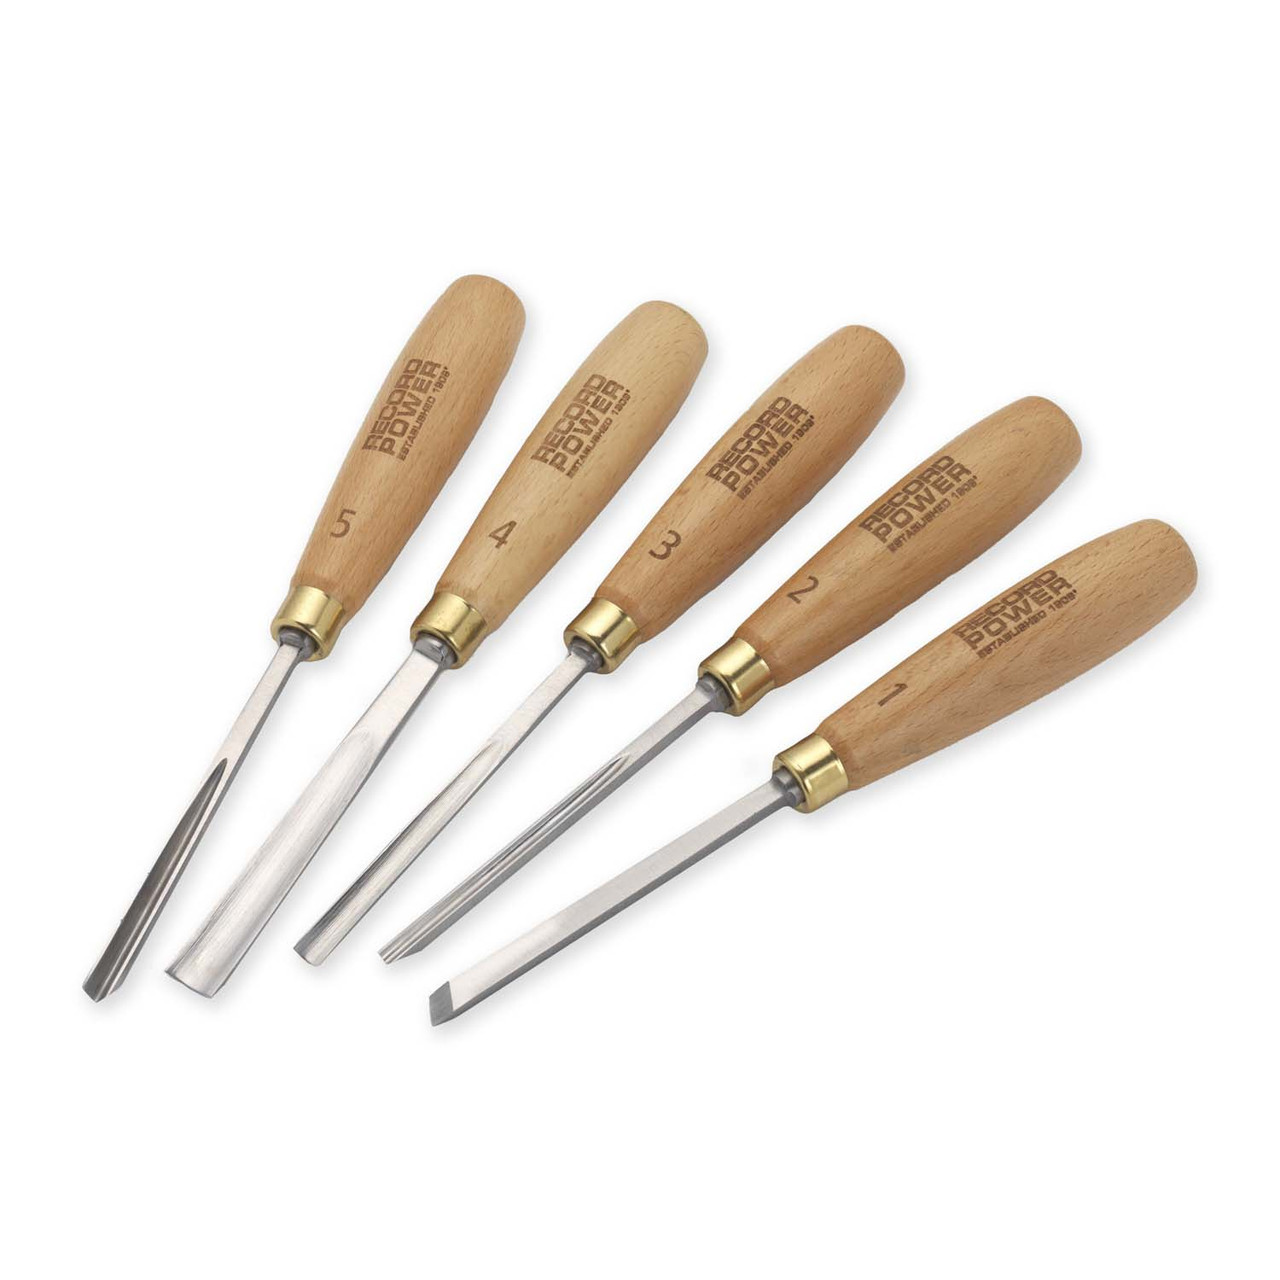 Record Power, 5 Piece Carving by Numbers Tool Set, The Essential Collection